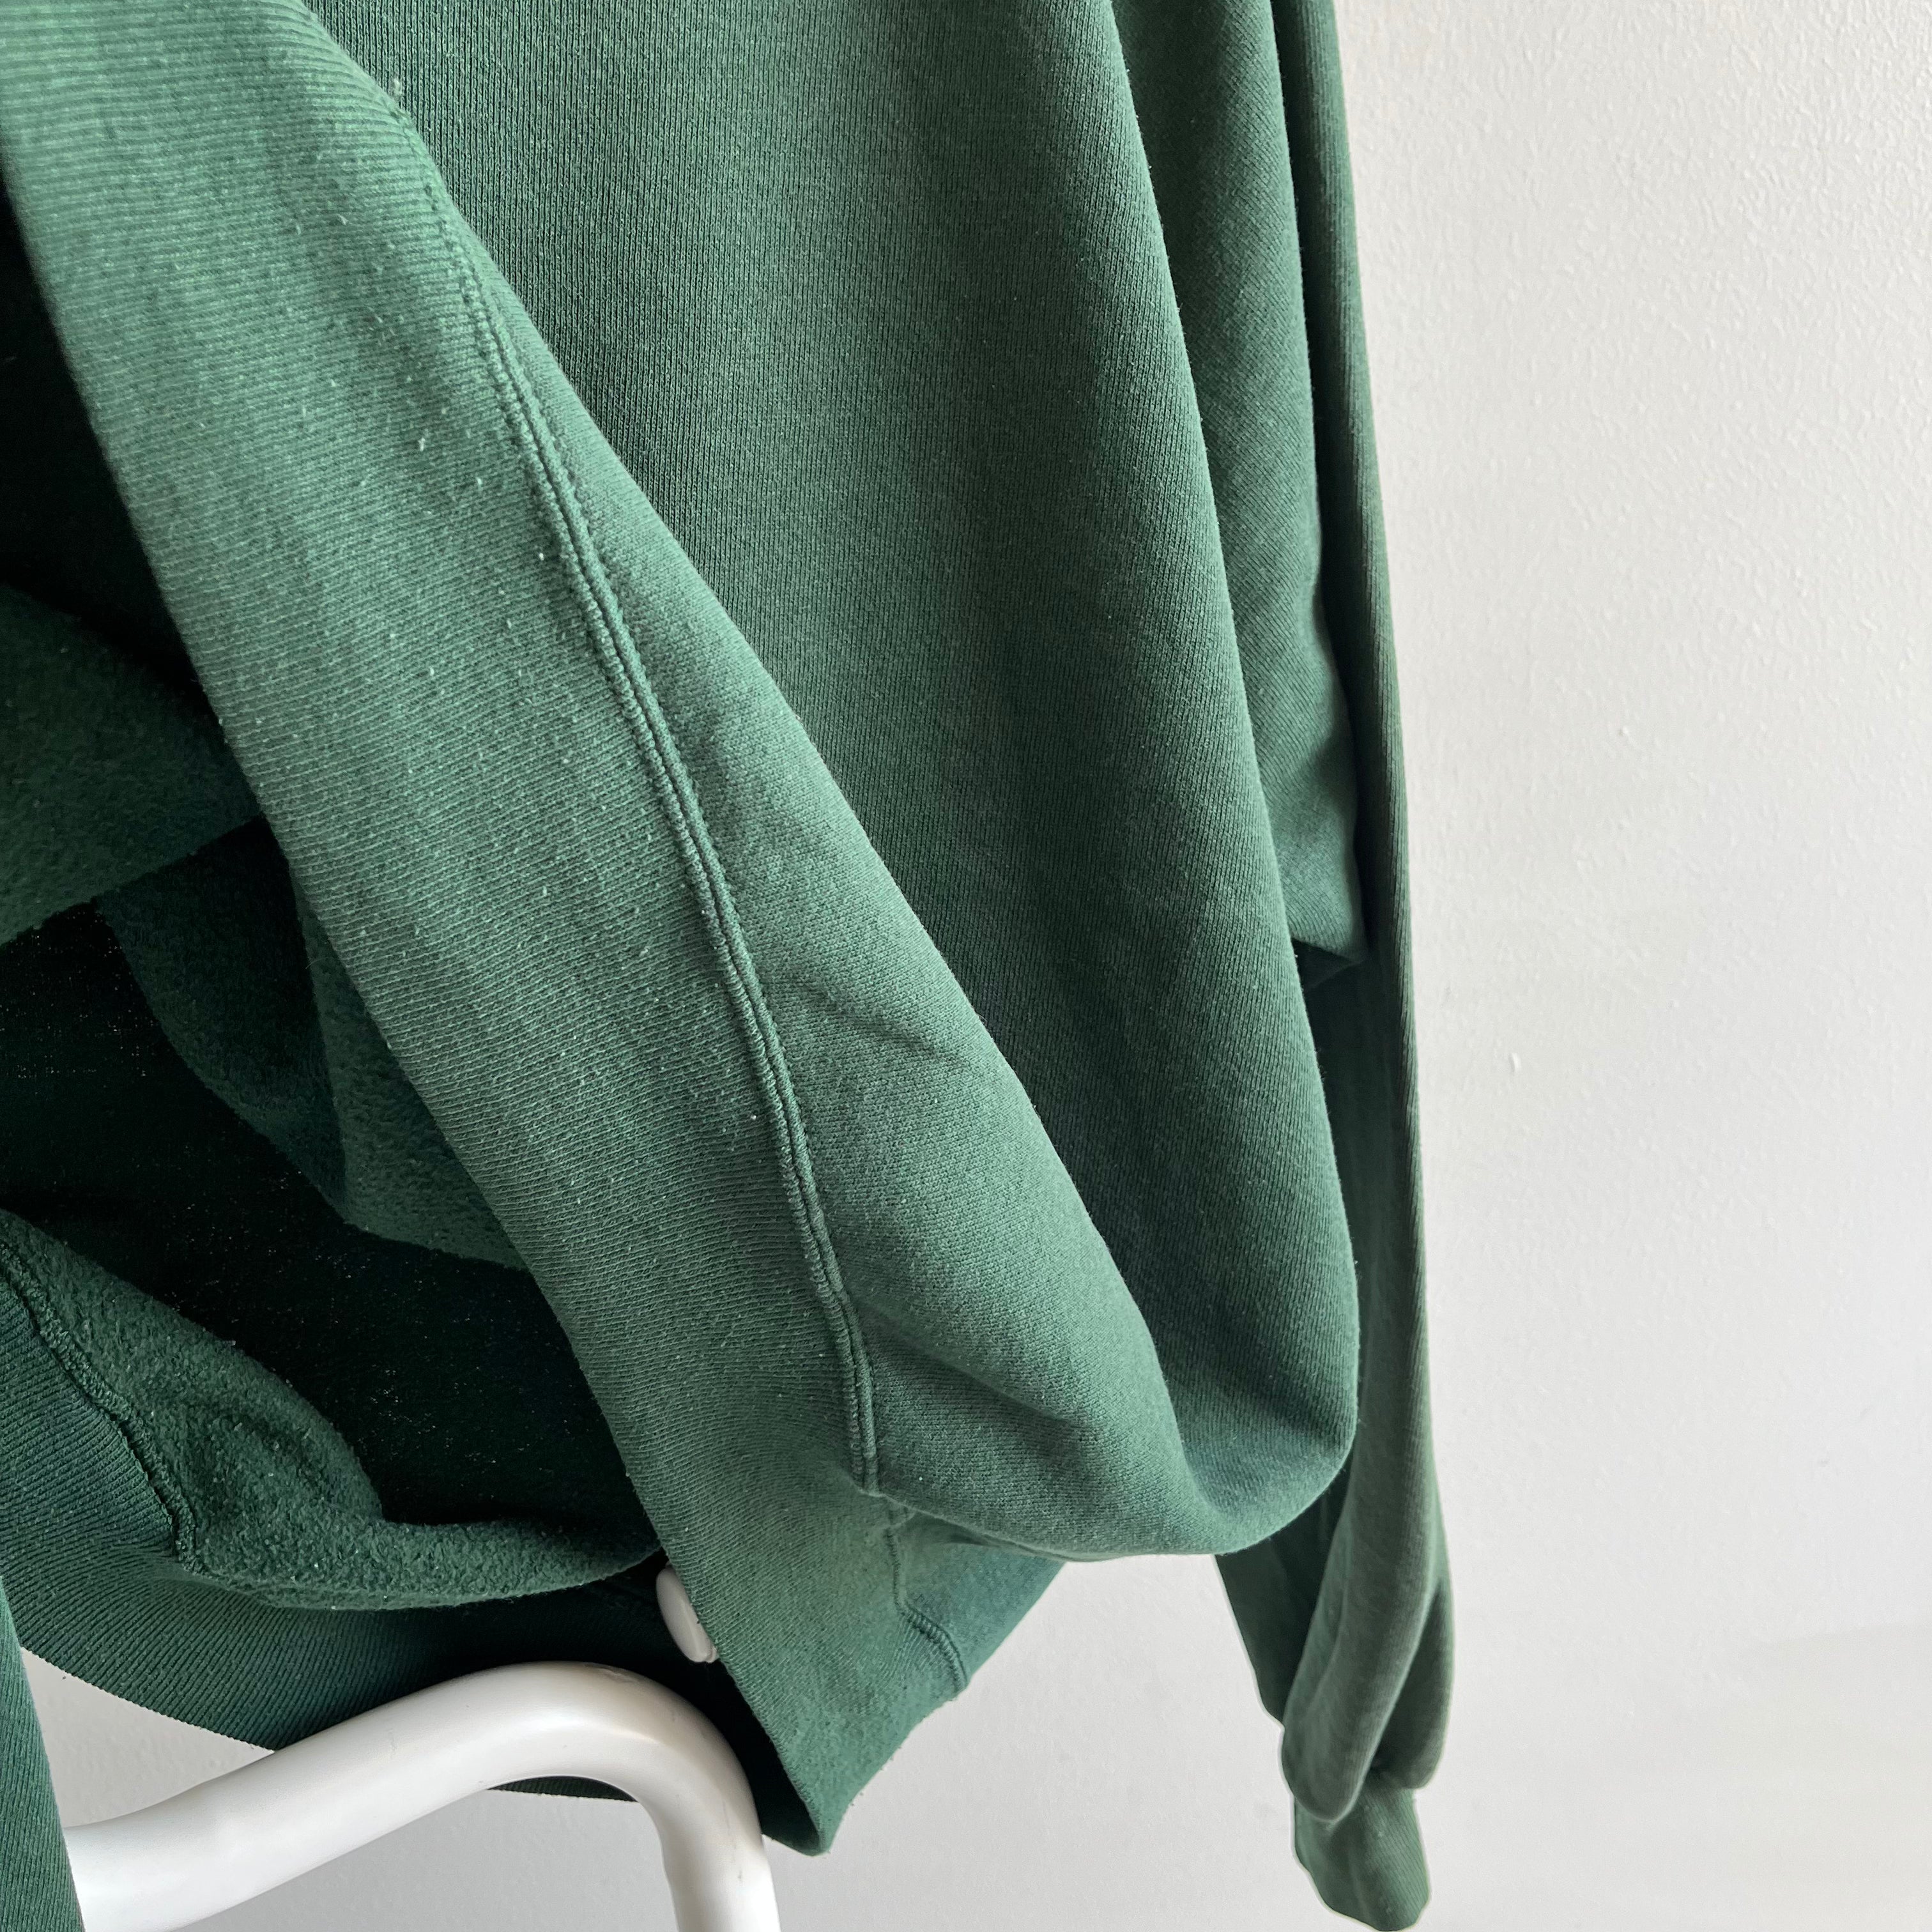 1980s Blank Forest Green Relaxed Fit Raglan by Jerzees